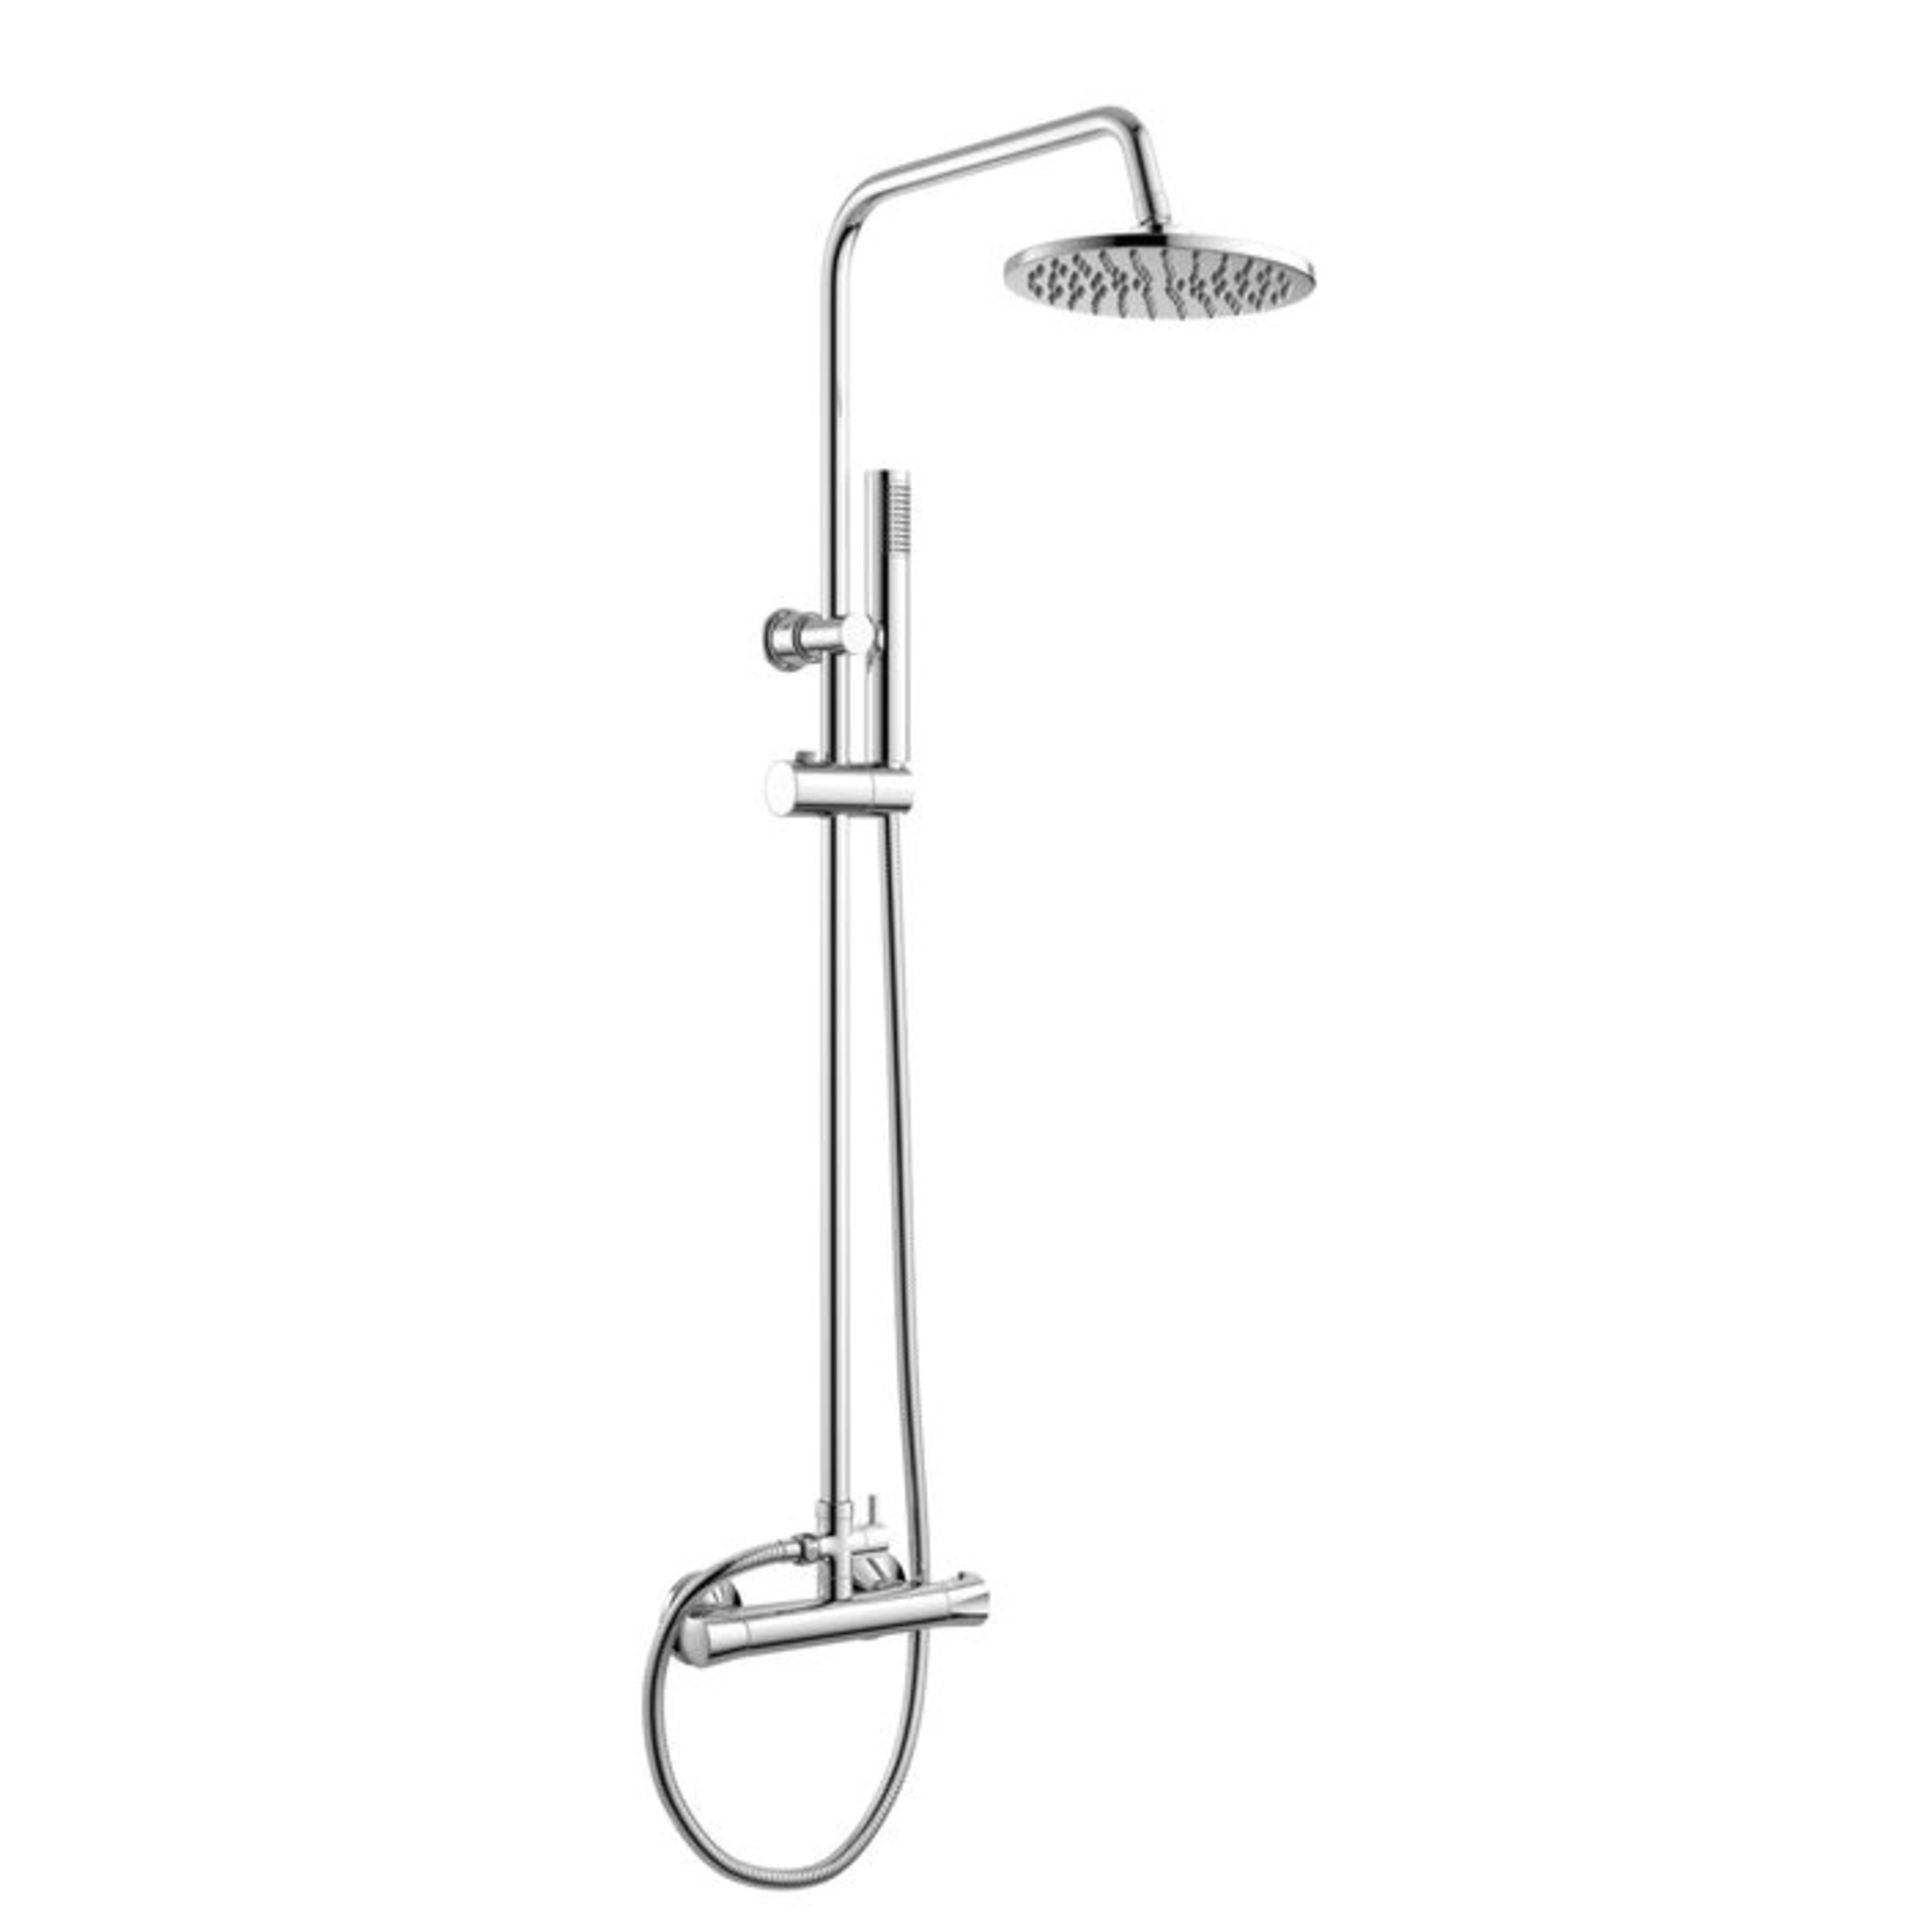 (AH97) Round Exposed Thermostatic Shower Kit Medium Head. They say three is a magic number, which is - Image 2 of 2